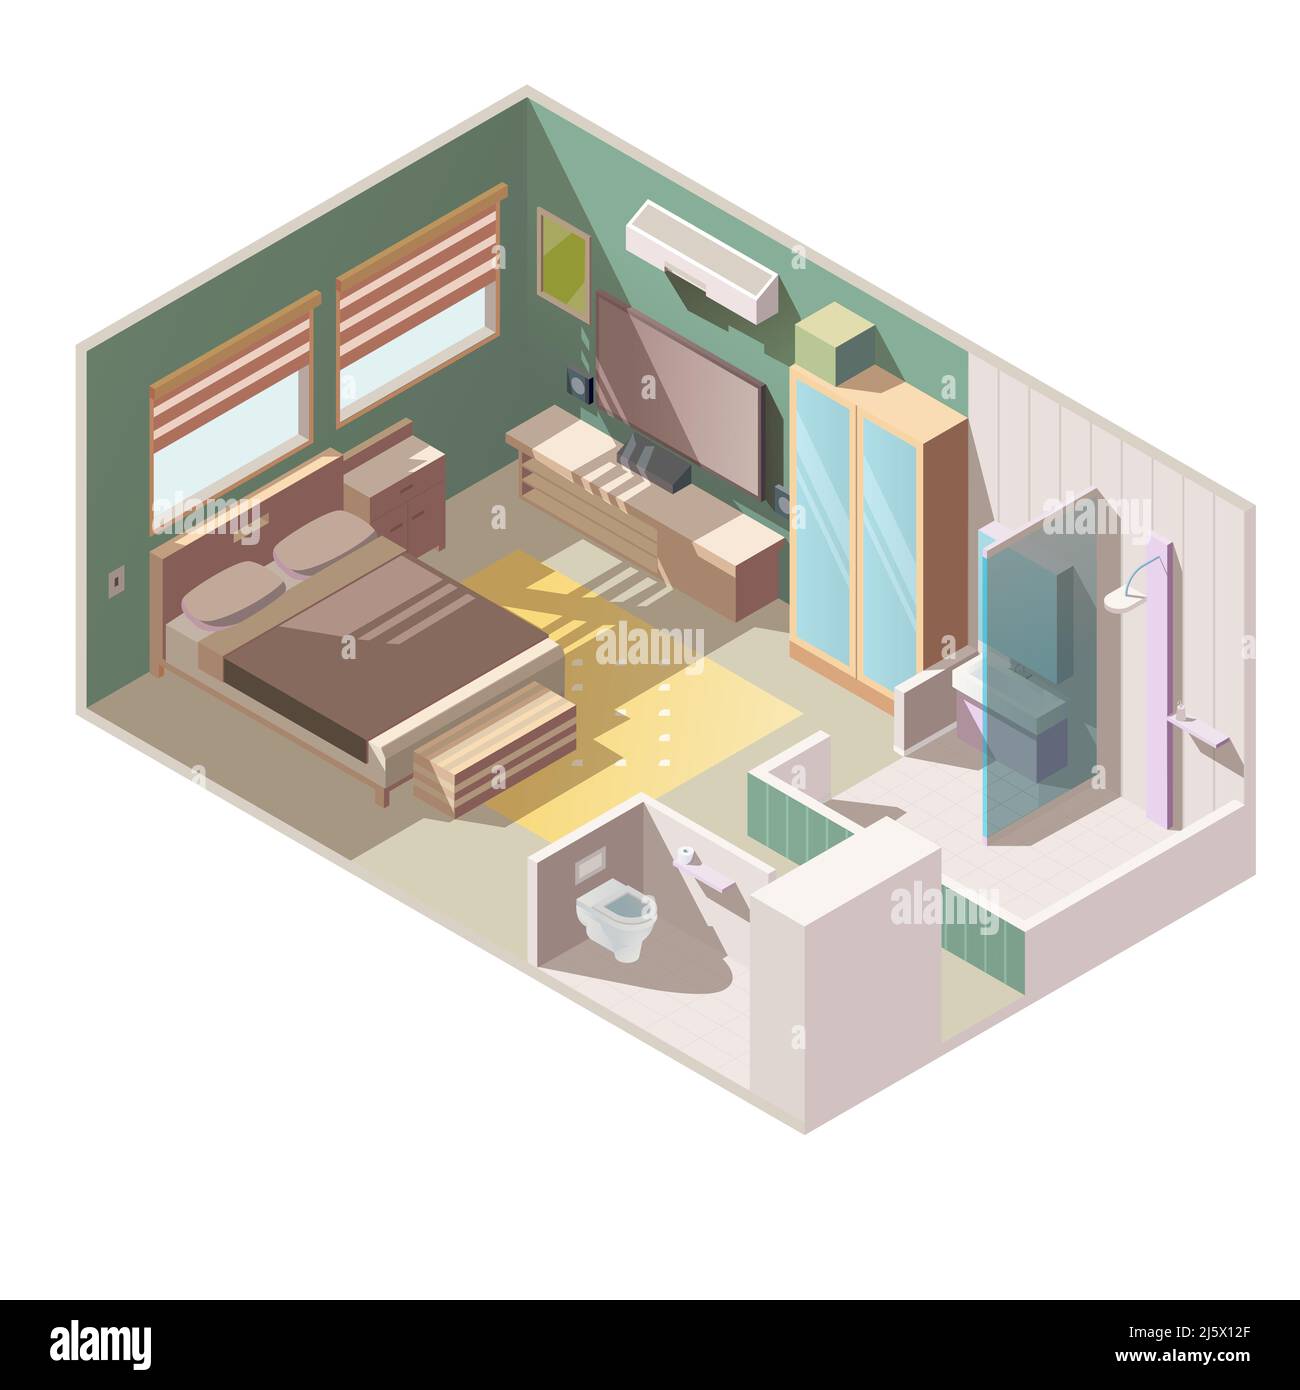 Cozy, single room apartment interior with separate toilet and bathroom shower cabin, double bed, TV set, wardrobe, and yellow carpet on floor cross se Stock Vector